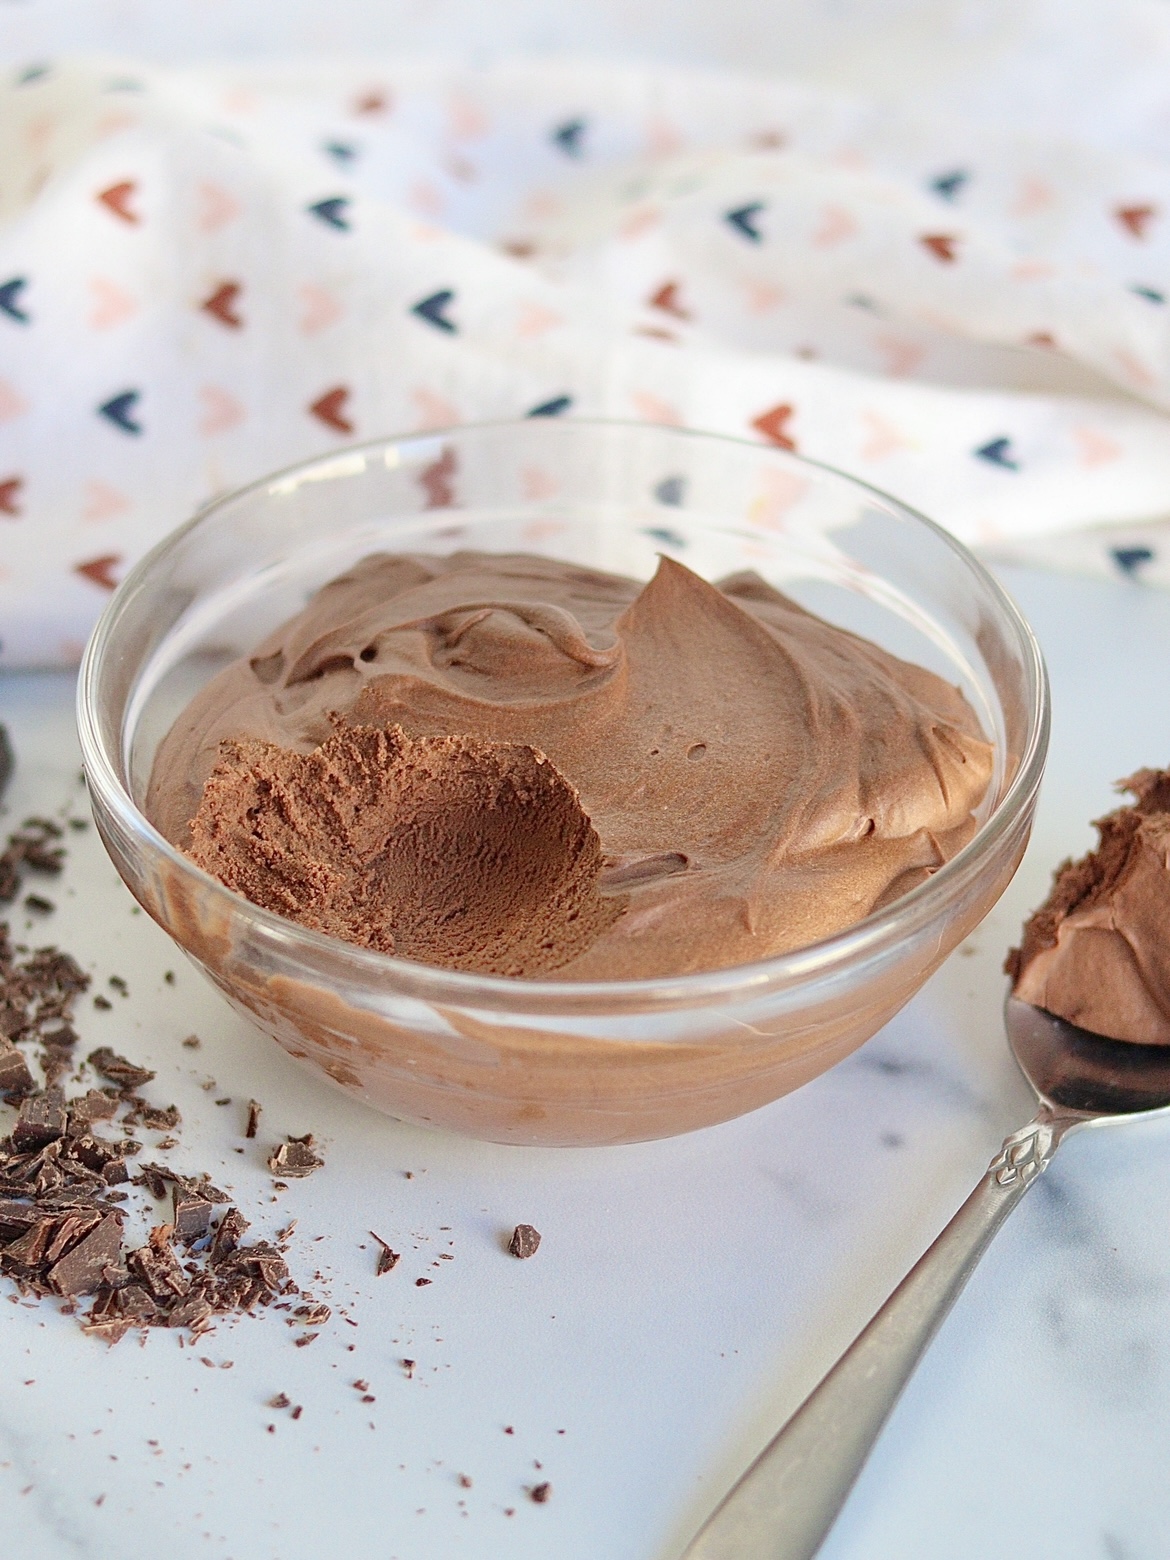 A bowl of two ingredient chocolate mousse with a spoonful taken out of it surrounded by chocolate shavings